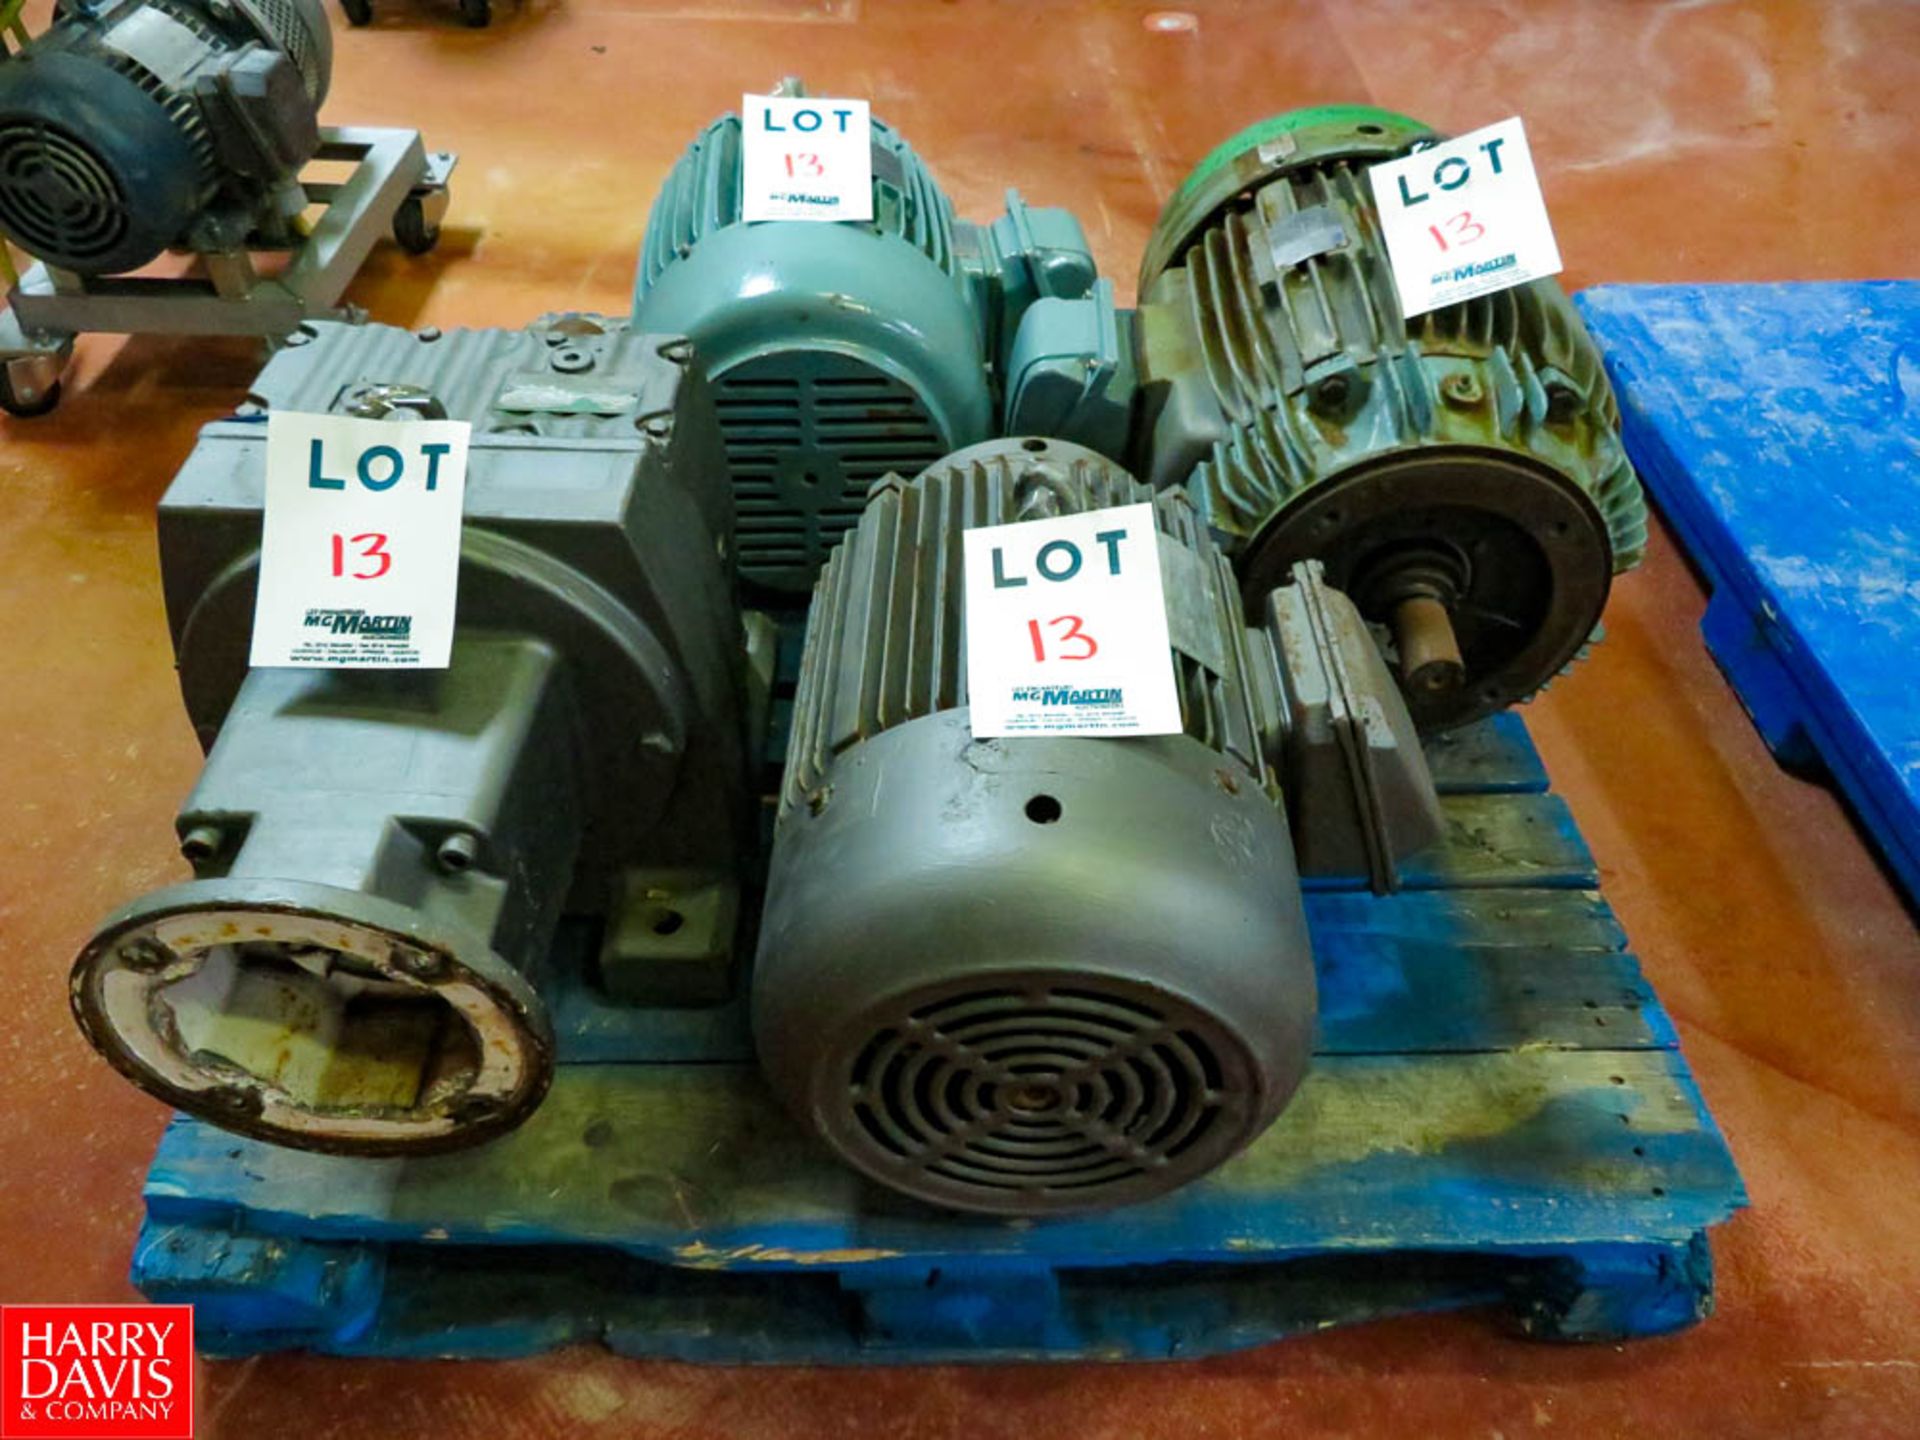 Nema and Leeson 25 HP and 15 HP Motors, with Mobile Gear Rigging Fee: $35